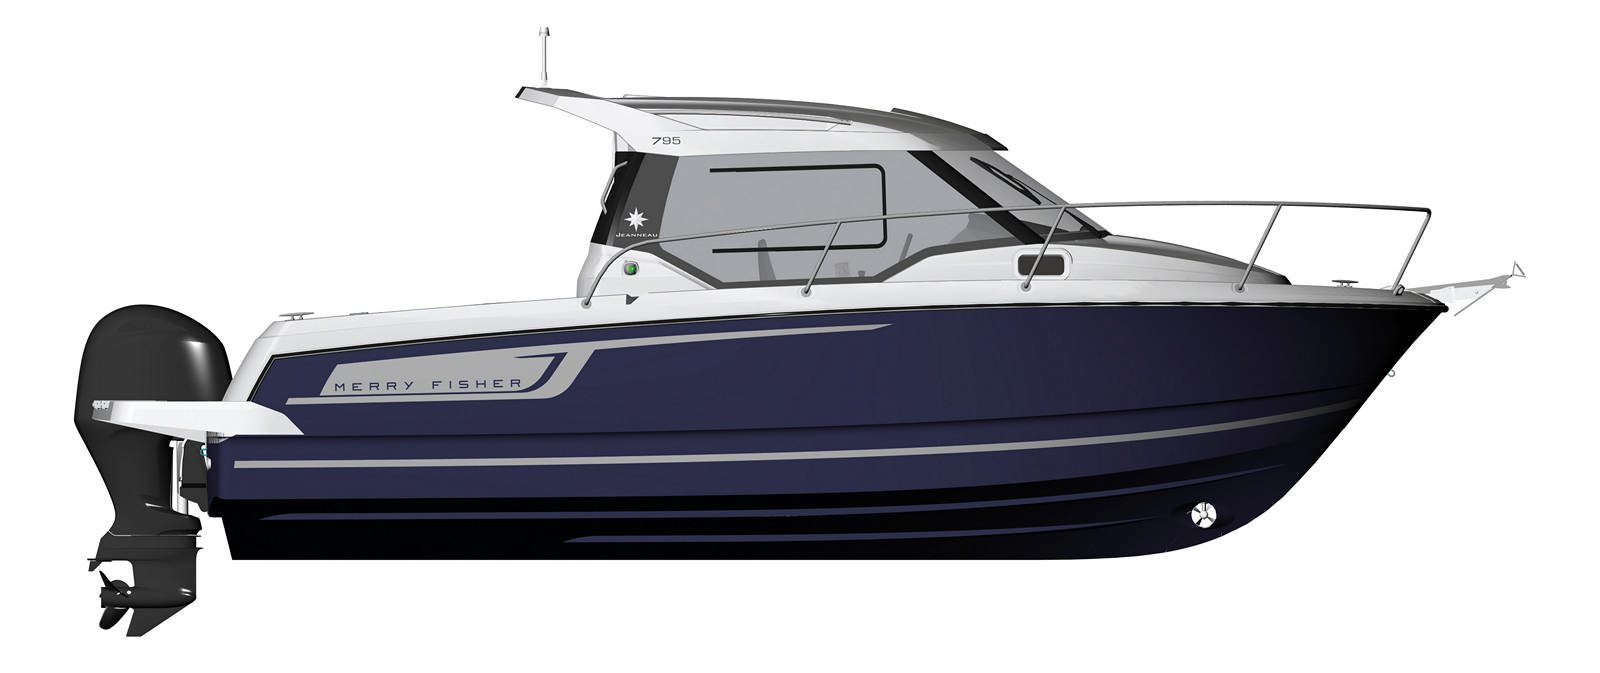 Jeanneau Merry Fisher 795 - Stream Yachts 